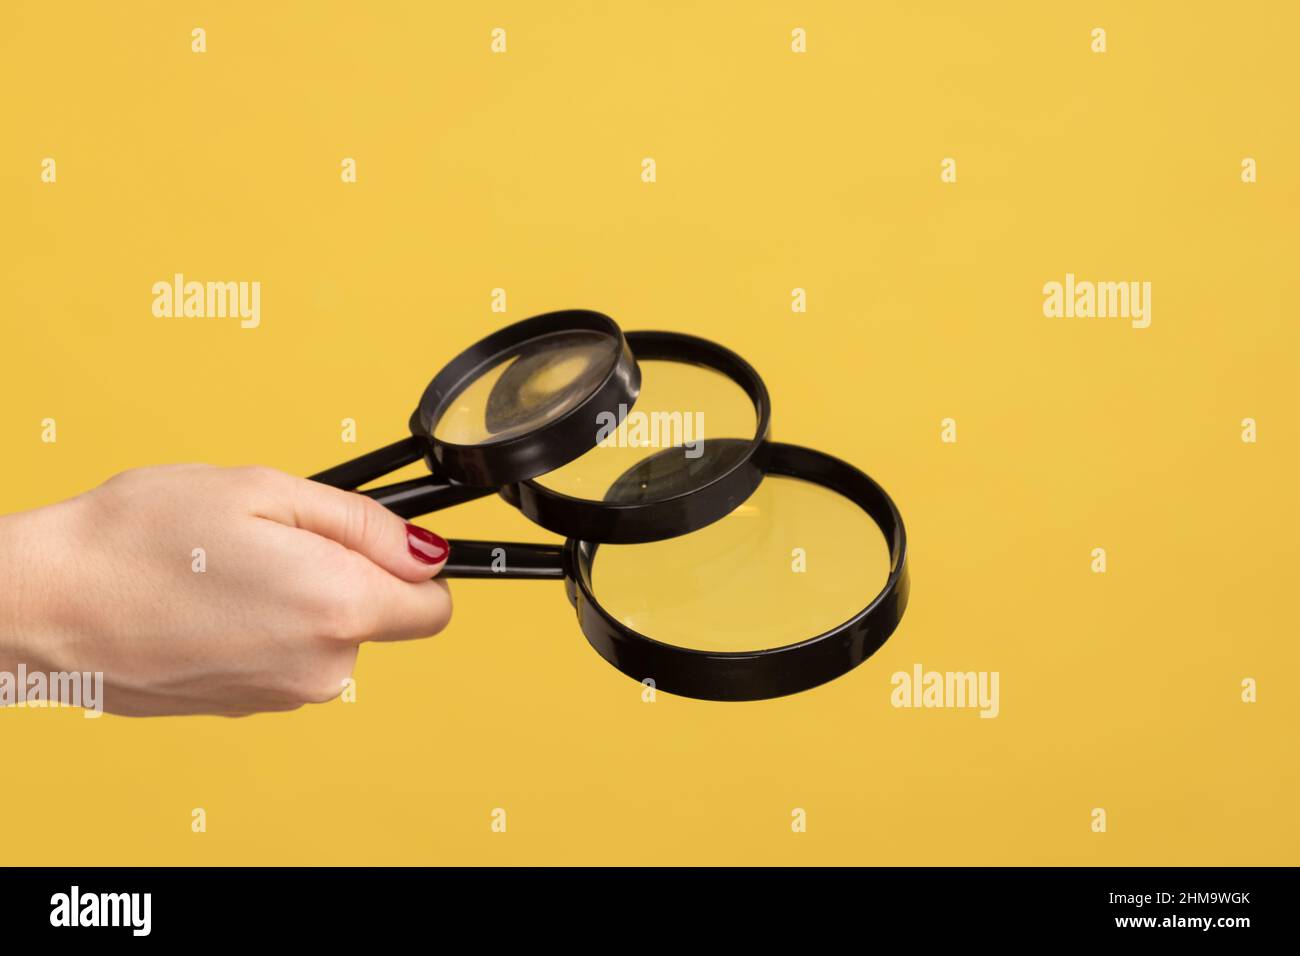 Profile side view closeup of woman hand holding several magnify glasses, loupe. Indoor studio shot isolated on yellow background. Stock Photo